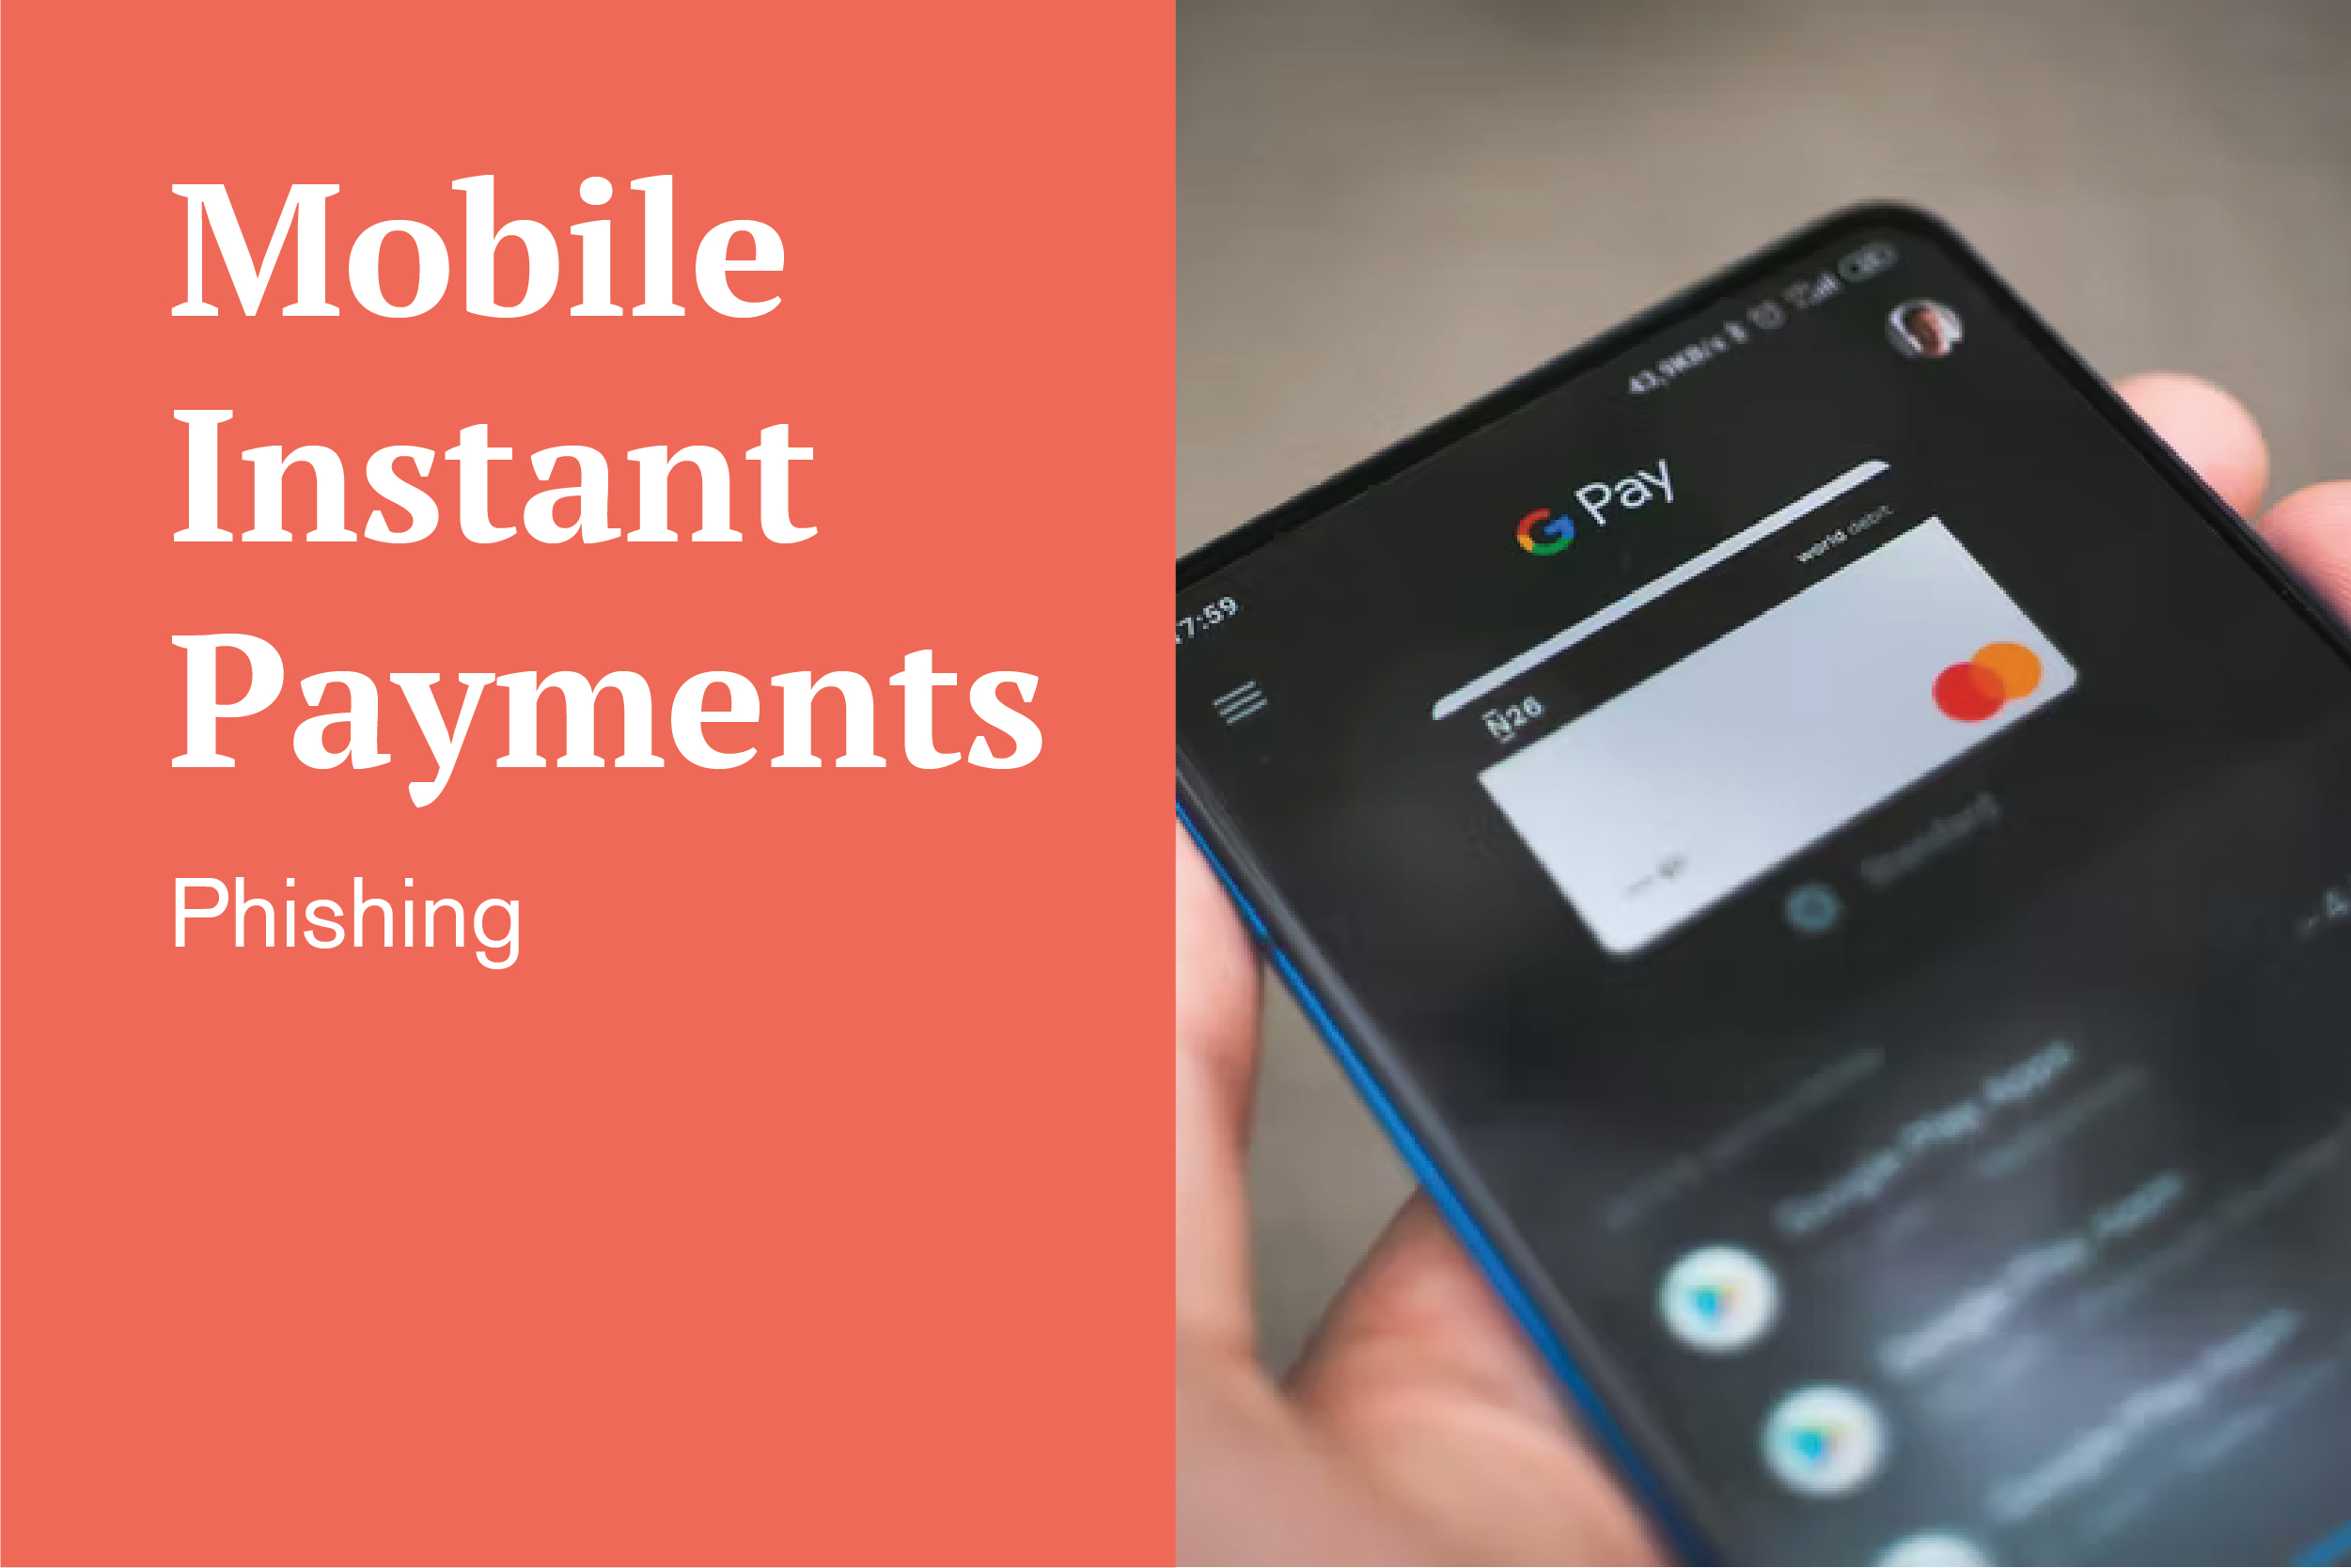 Mobile instant payments